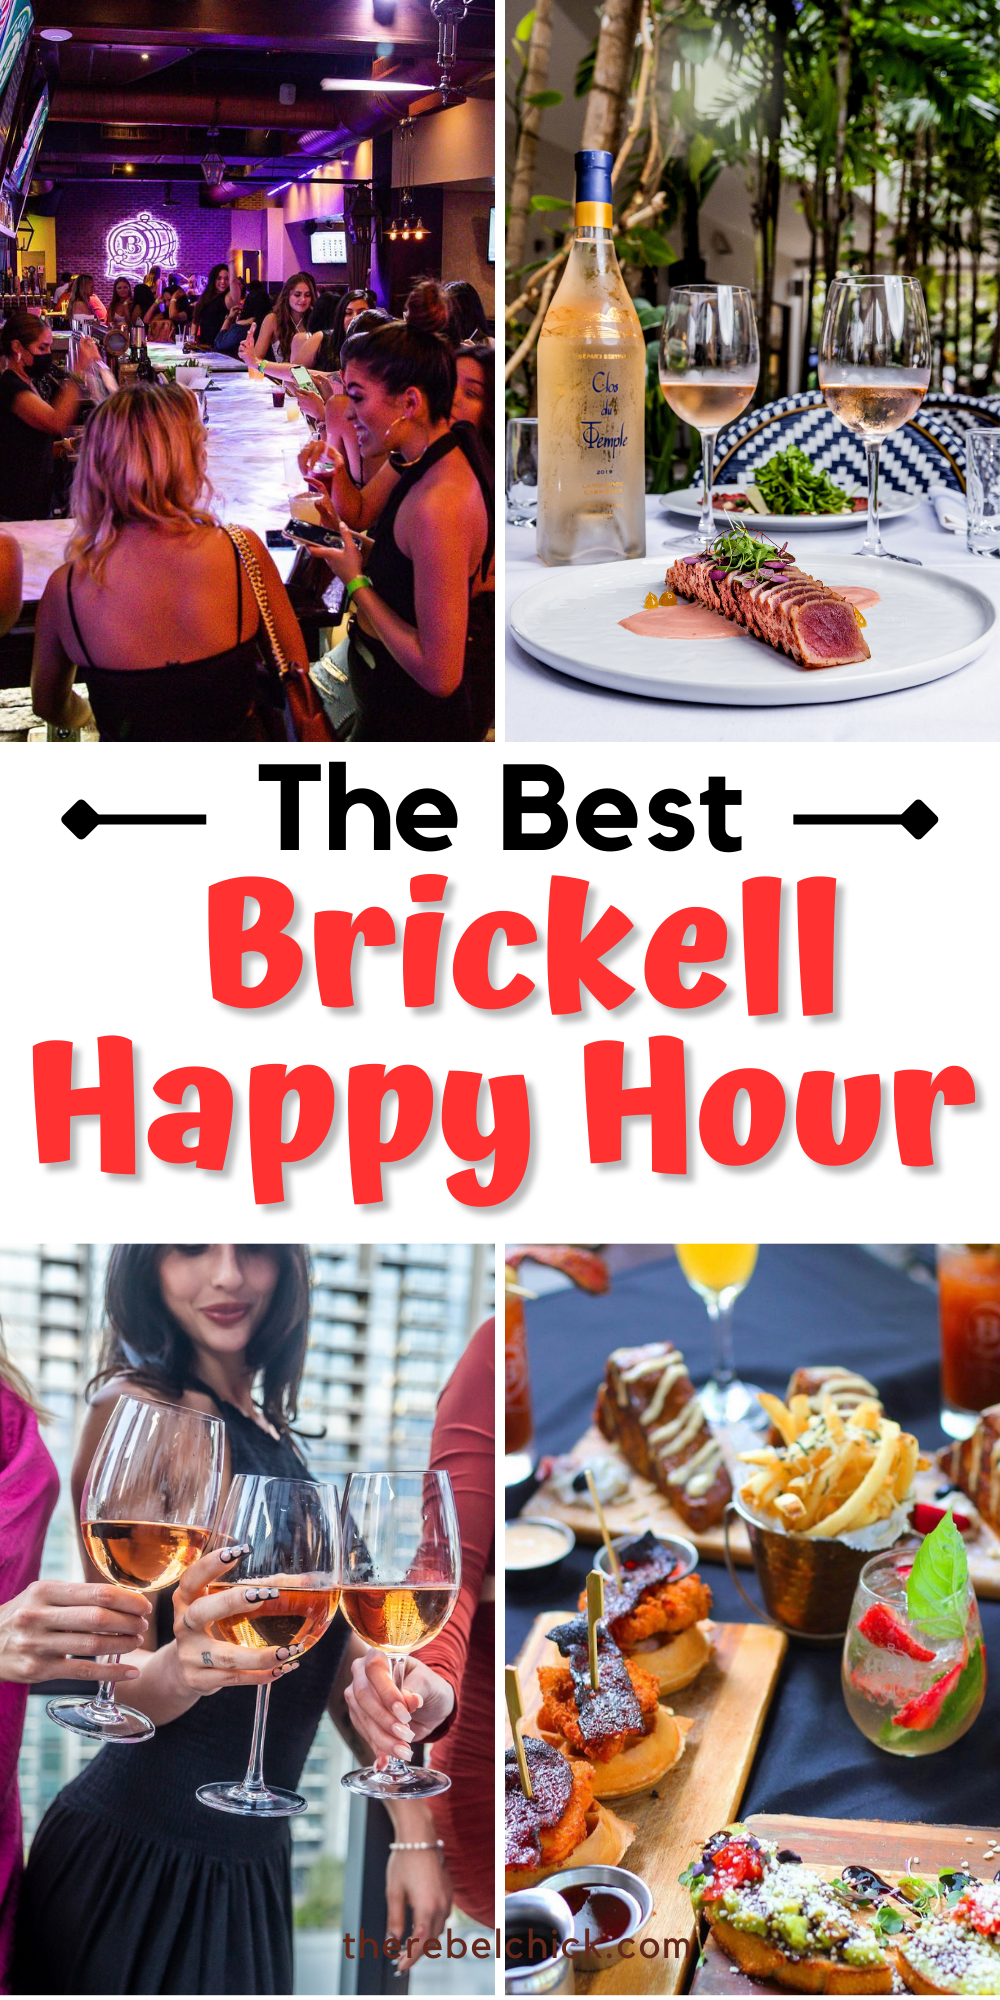 The Best Brickell Happy Hour Spots